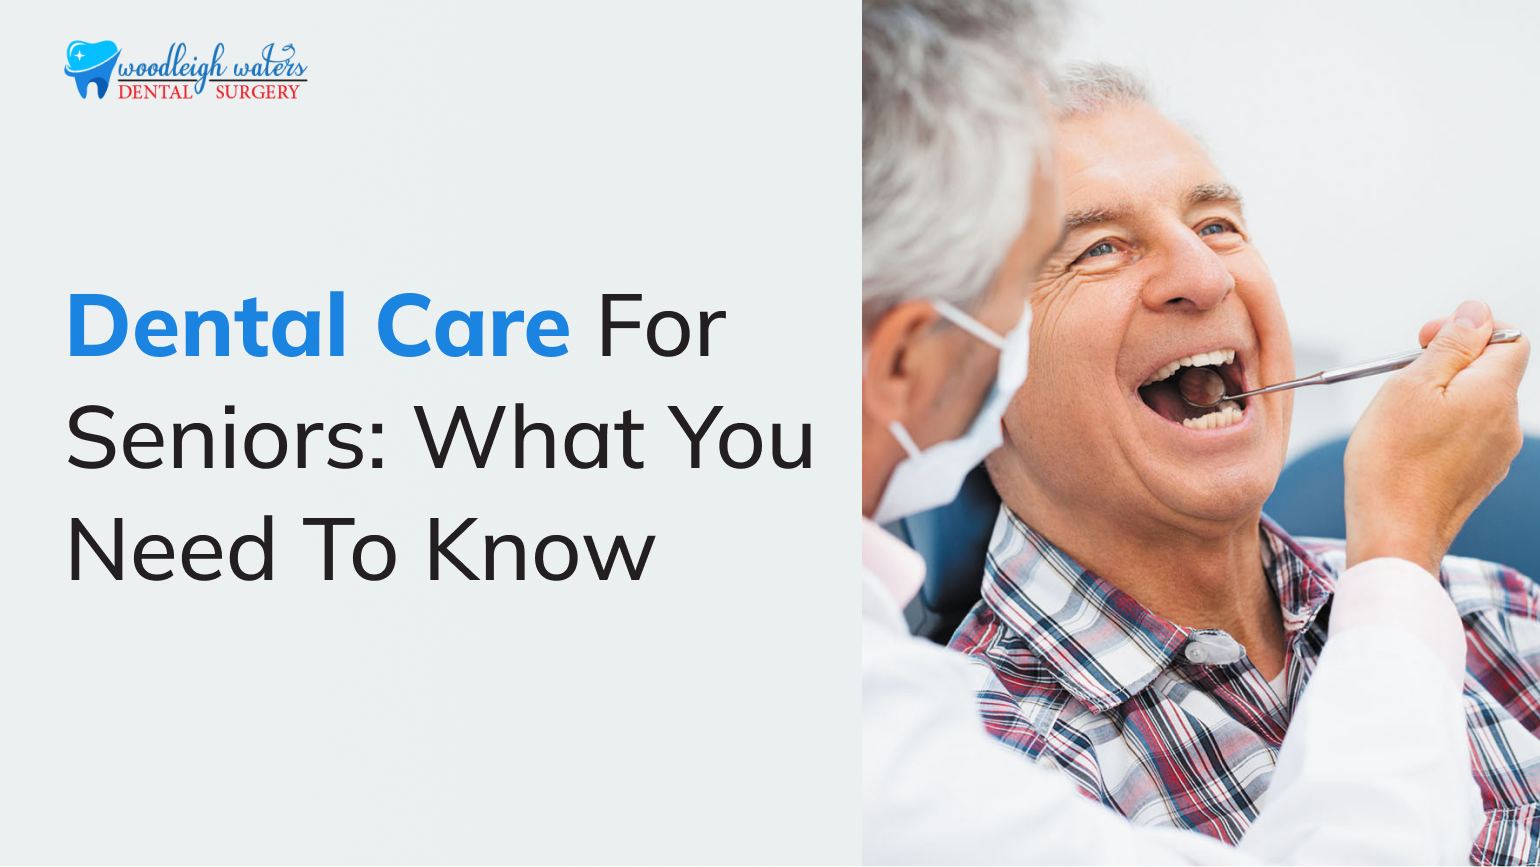 Tips You Need To Know For Dental Care For Seniors